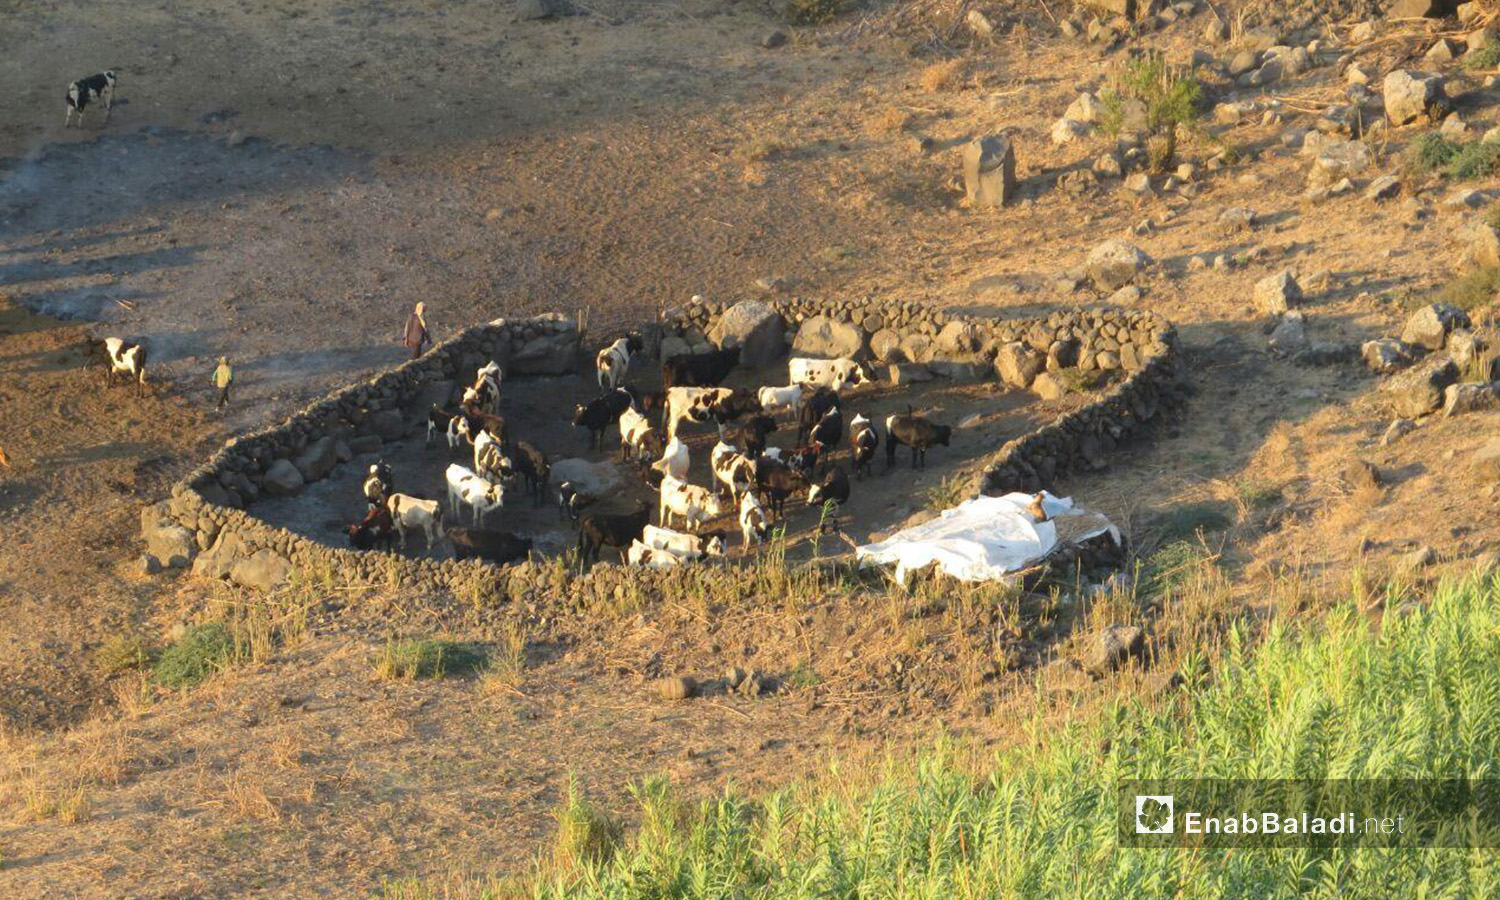 The cows grazing in the Yarmouk Valley – 07 August 2020 (Enab Baladi / Halim Mohammad)